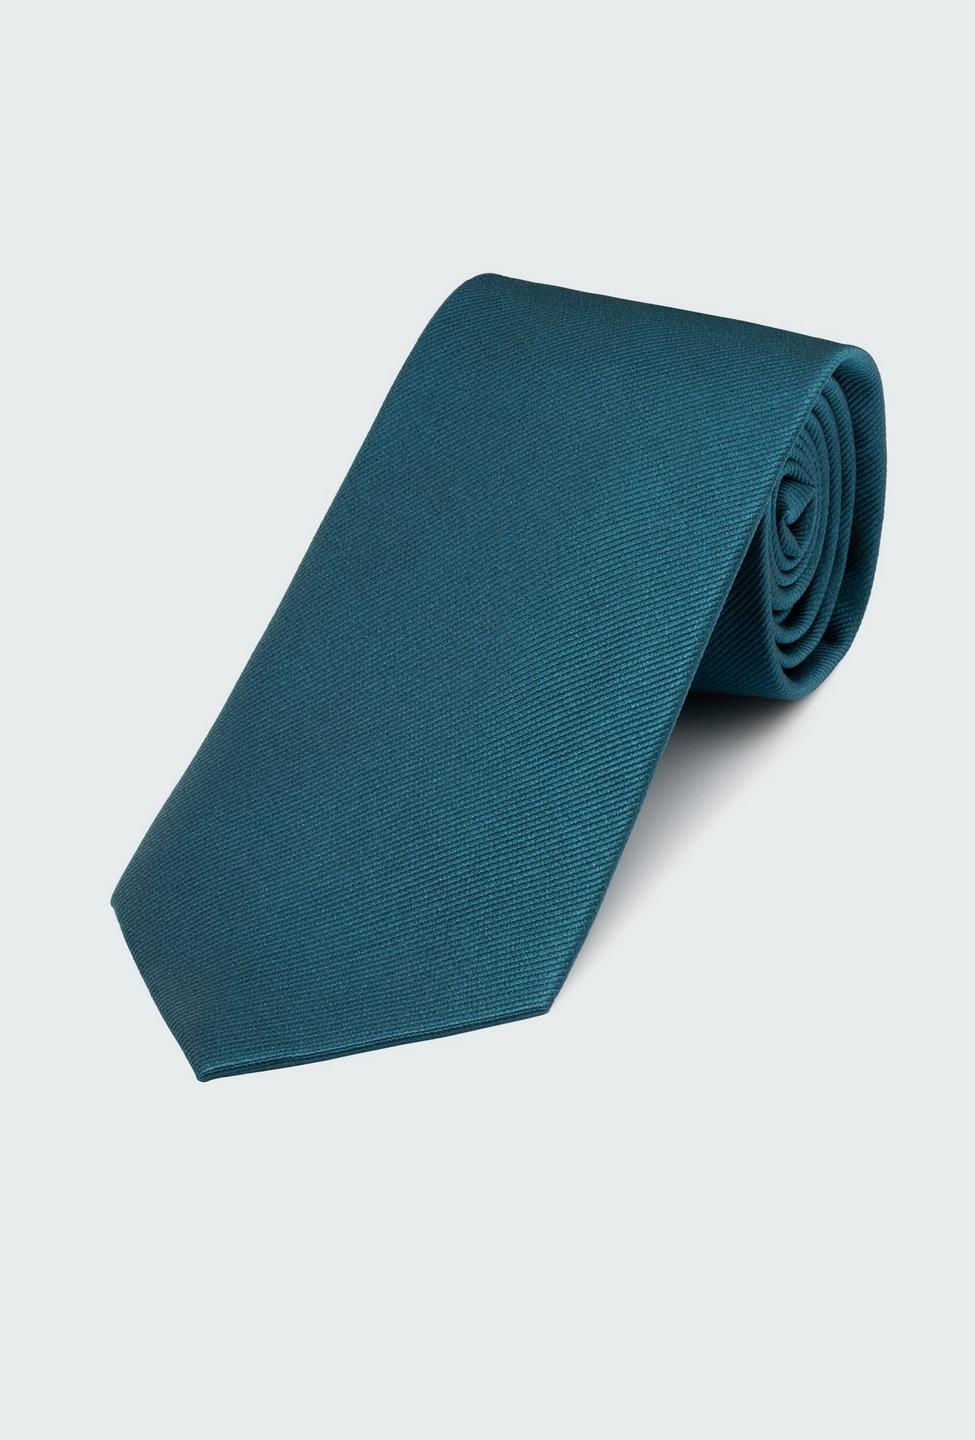 Green tie - Solid Design from Indochino Collection